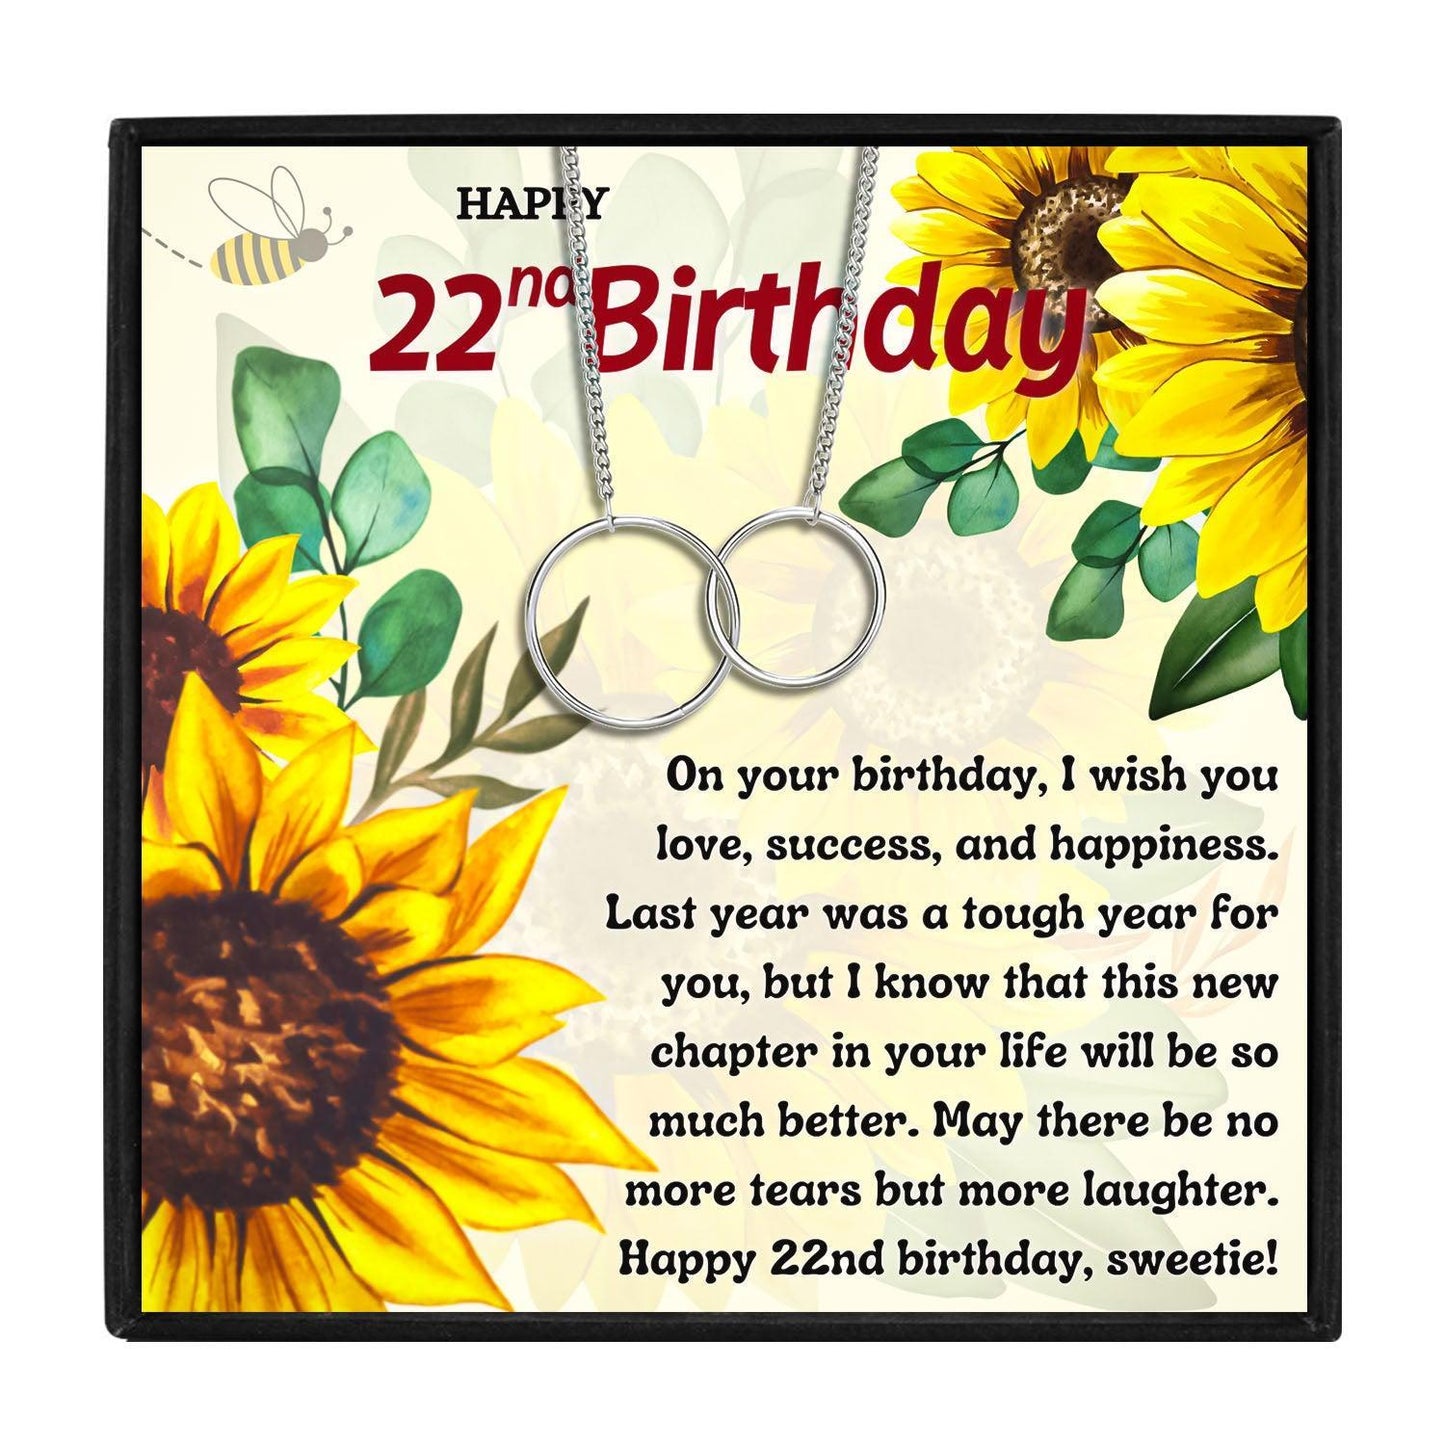 22nd Birthday Gift Necklace Set For Women in 2023 | 22nd Birthday Gift Necklace Set For Women - undefined | 22nd, 22nd Birthday Heartfelt Gift Necklace, Meaningful Birthday Gift Necklace | From Hunny Life | hunnylife.com